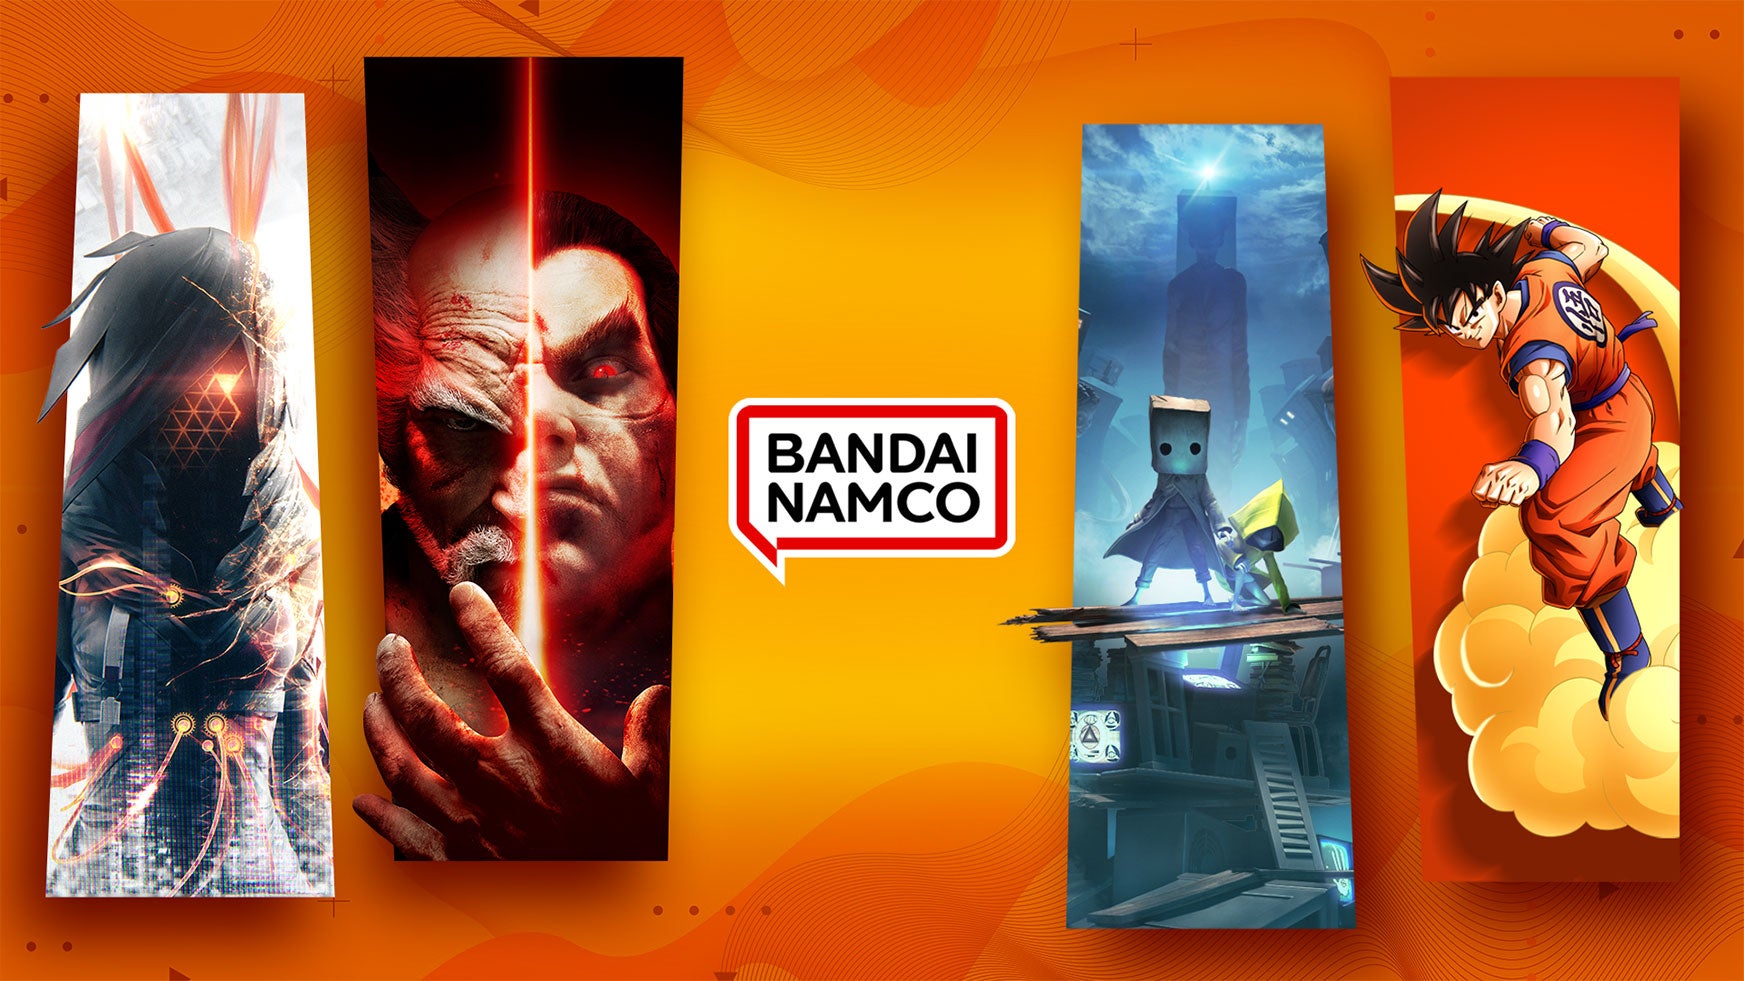 Image for Bandai Namco's game sales up 55% year-on-year during Q1 FY2023